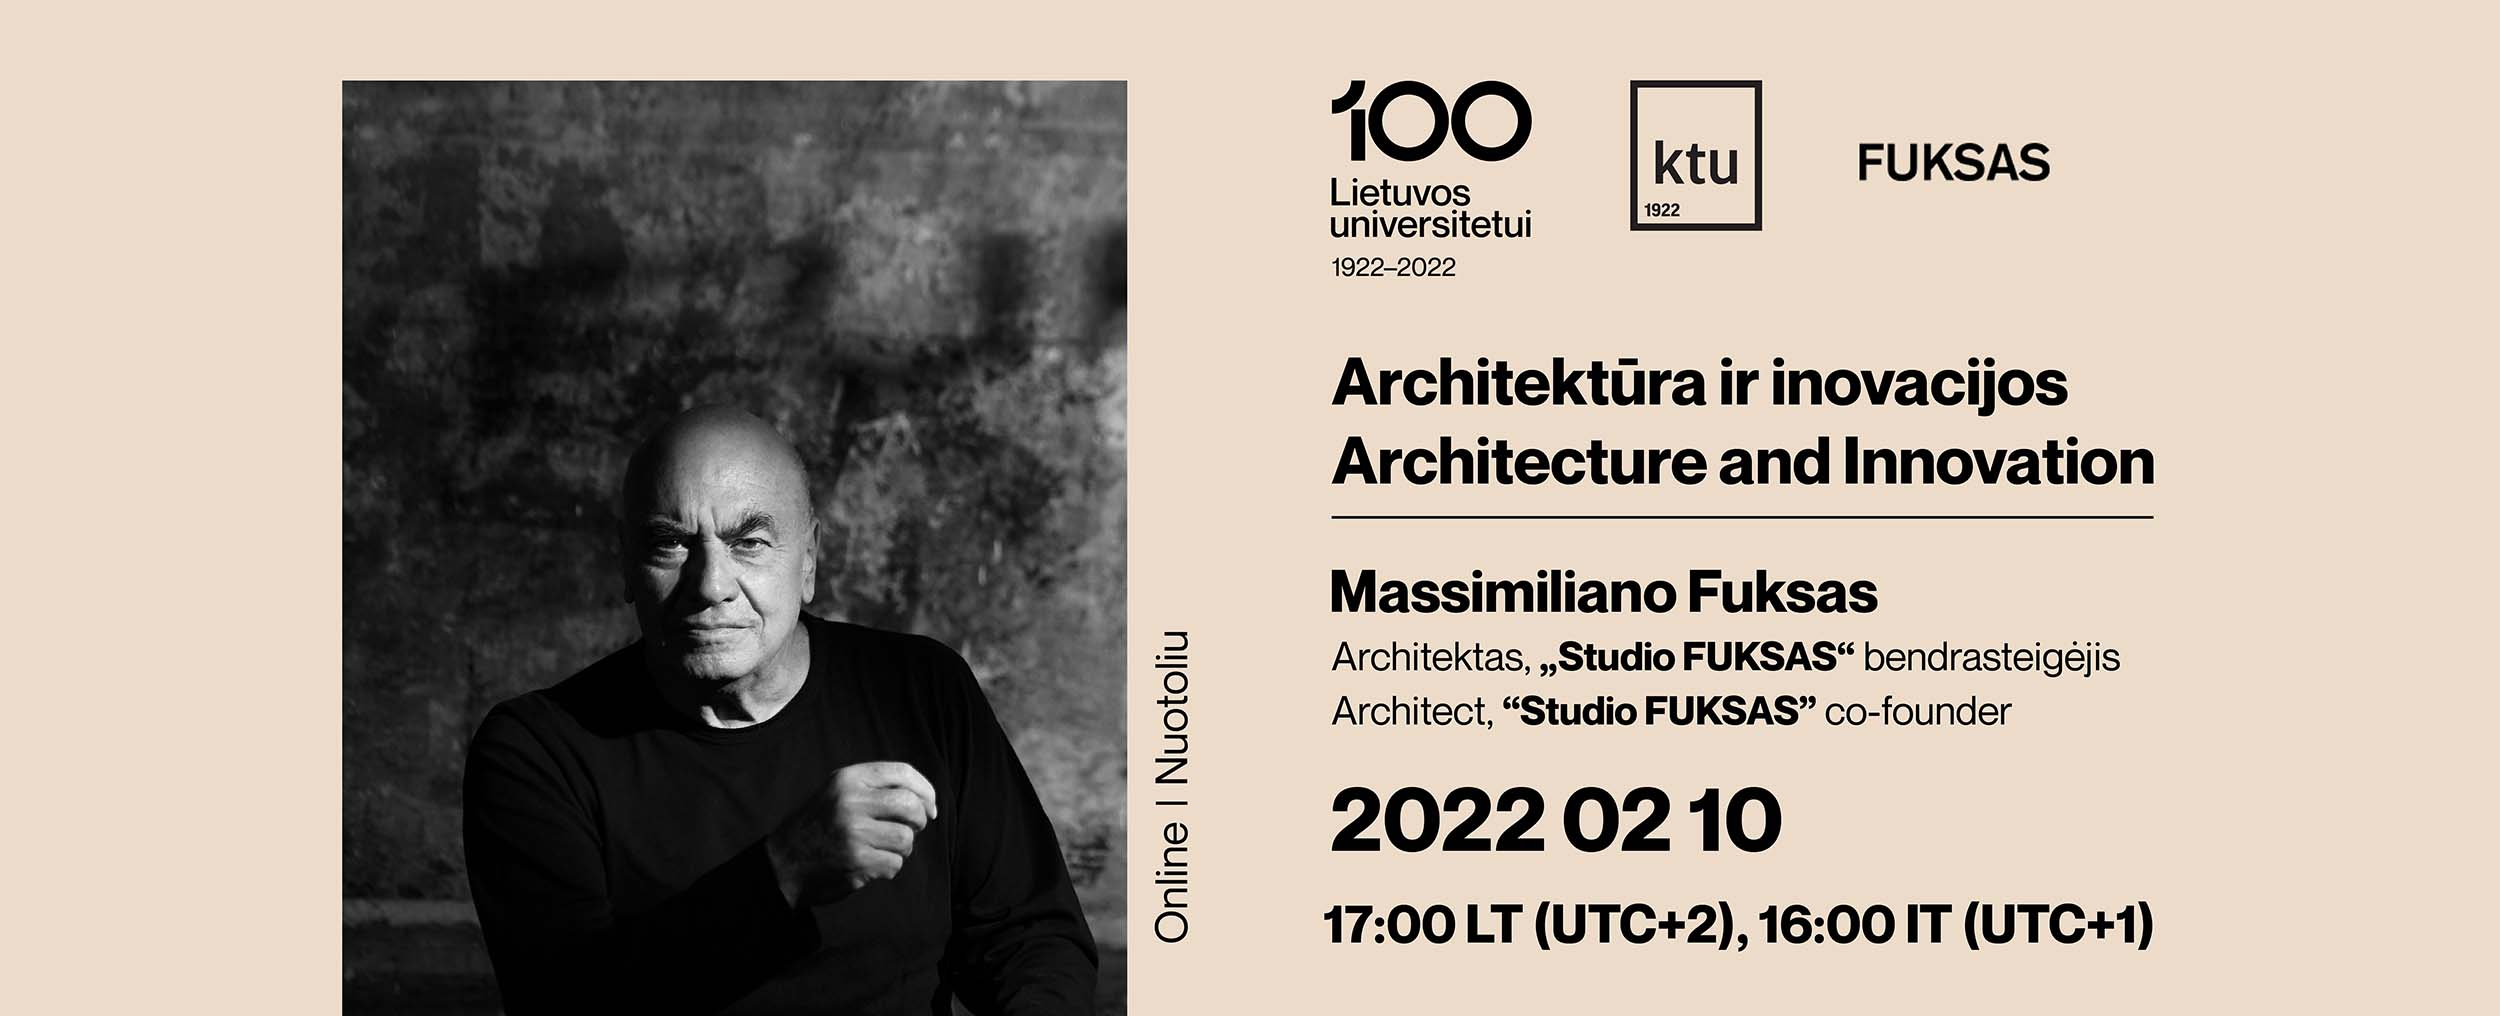 “Architecture and Innovation” – a lecture by Massimiliano Fuksas as Kaunas University of Technology, Lithuania 2022, February 10